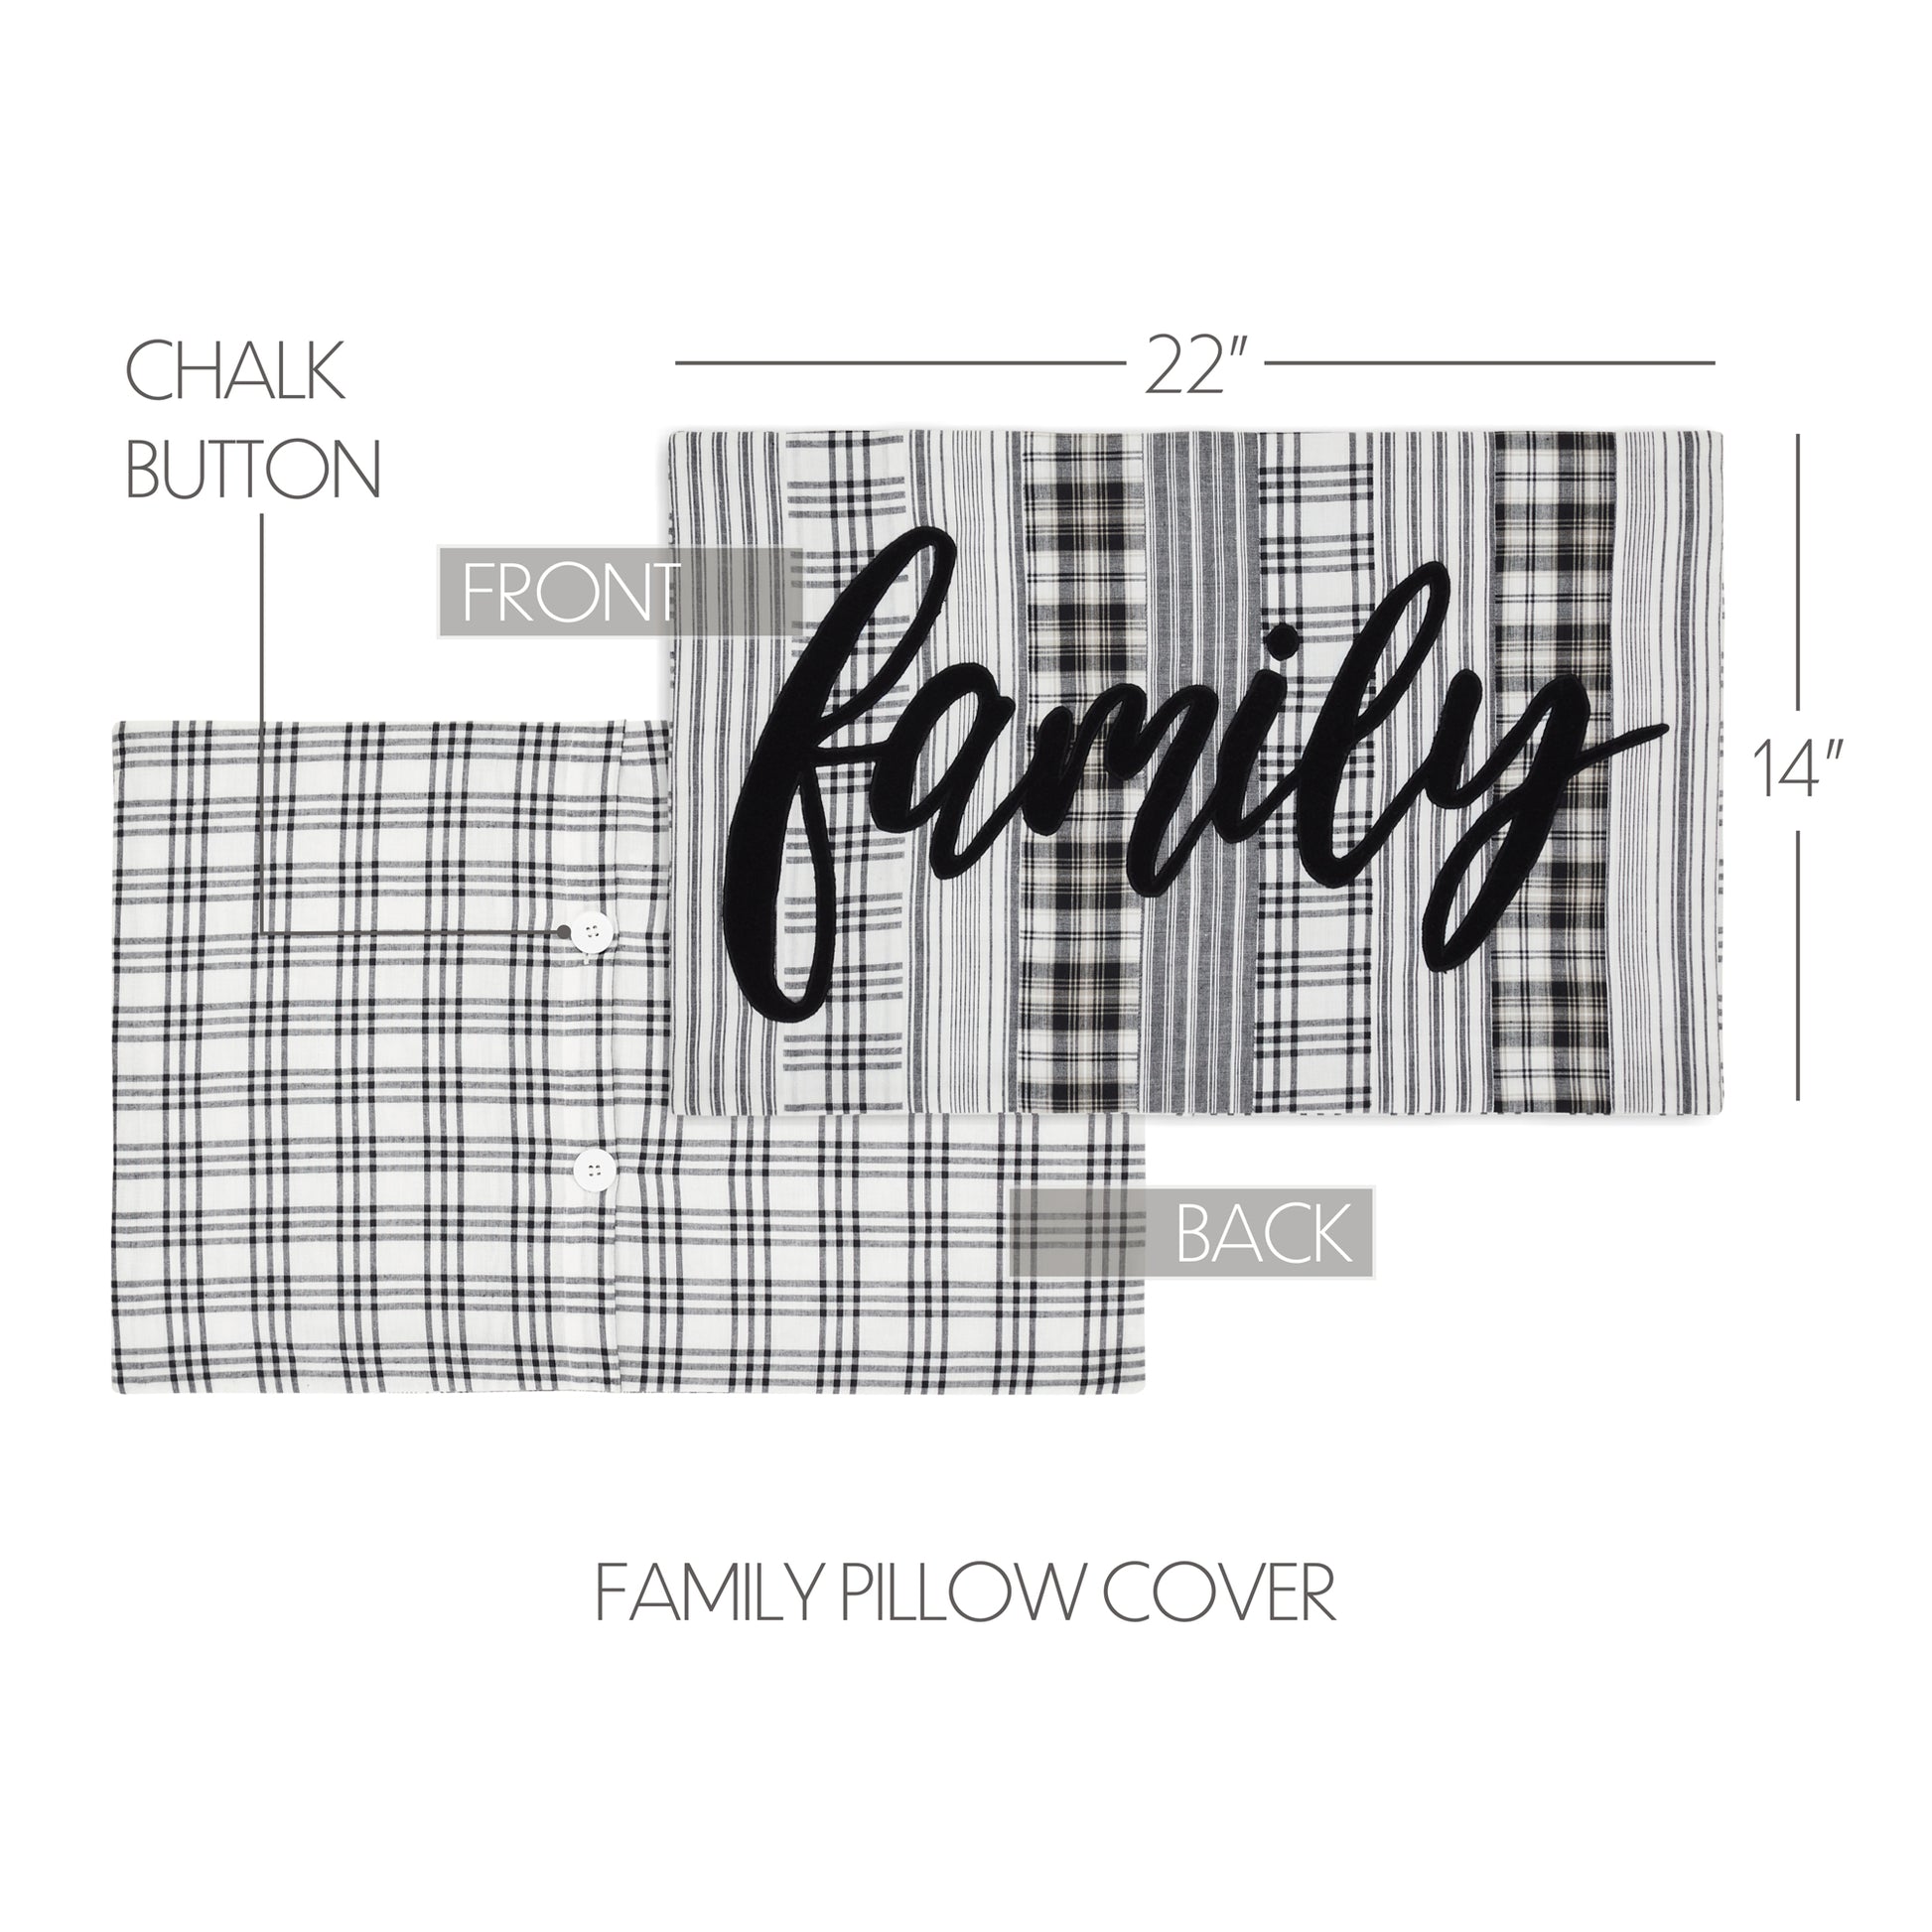 80448-Sawyer-Mill-Black-Family-Pillow-Cover-14x22-image-1